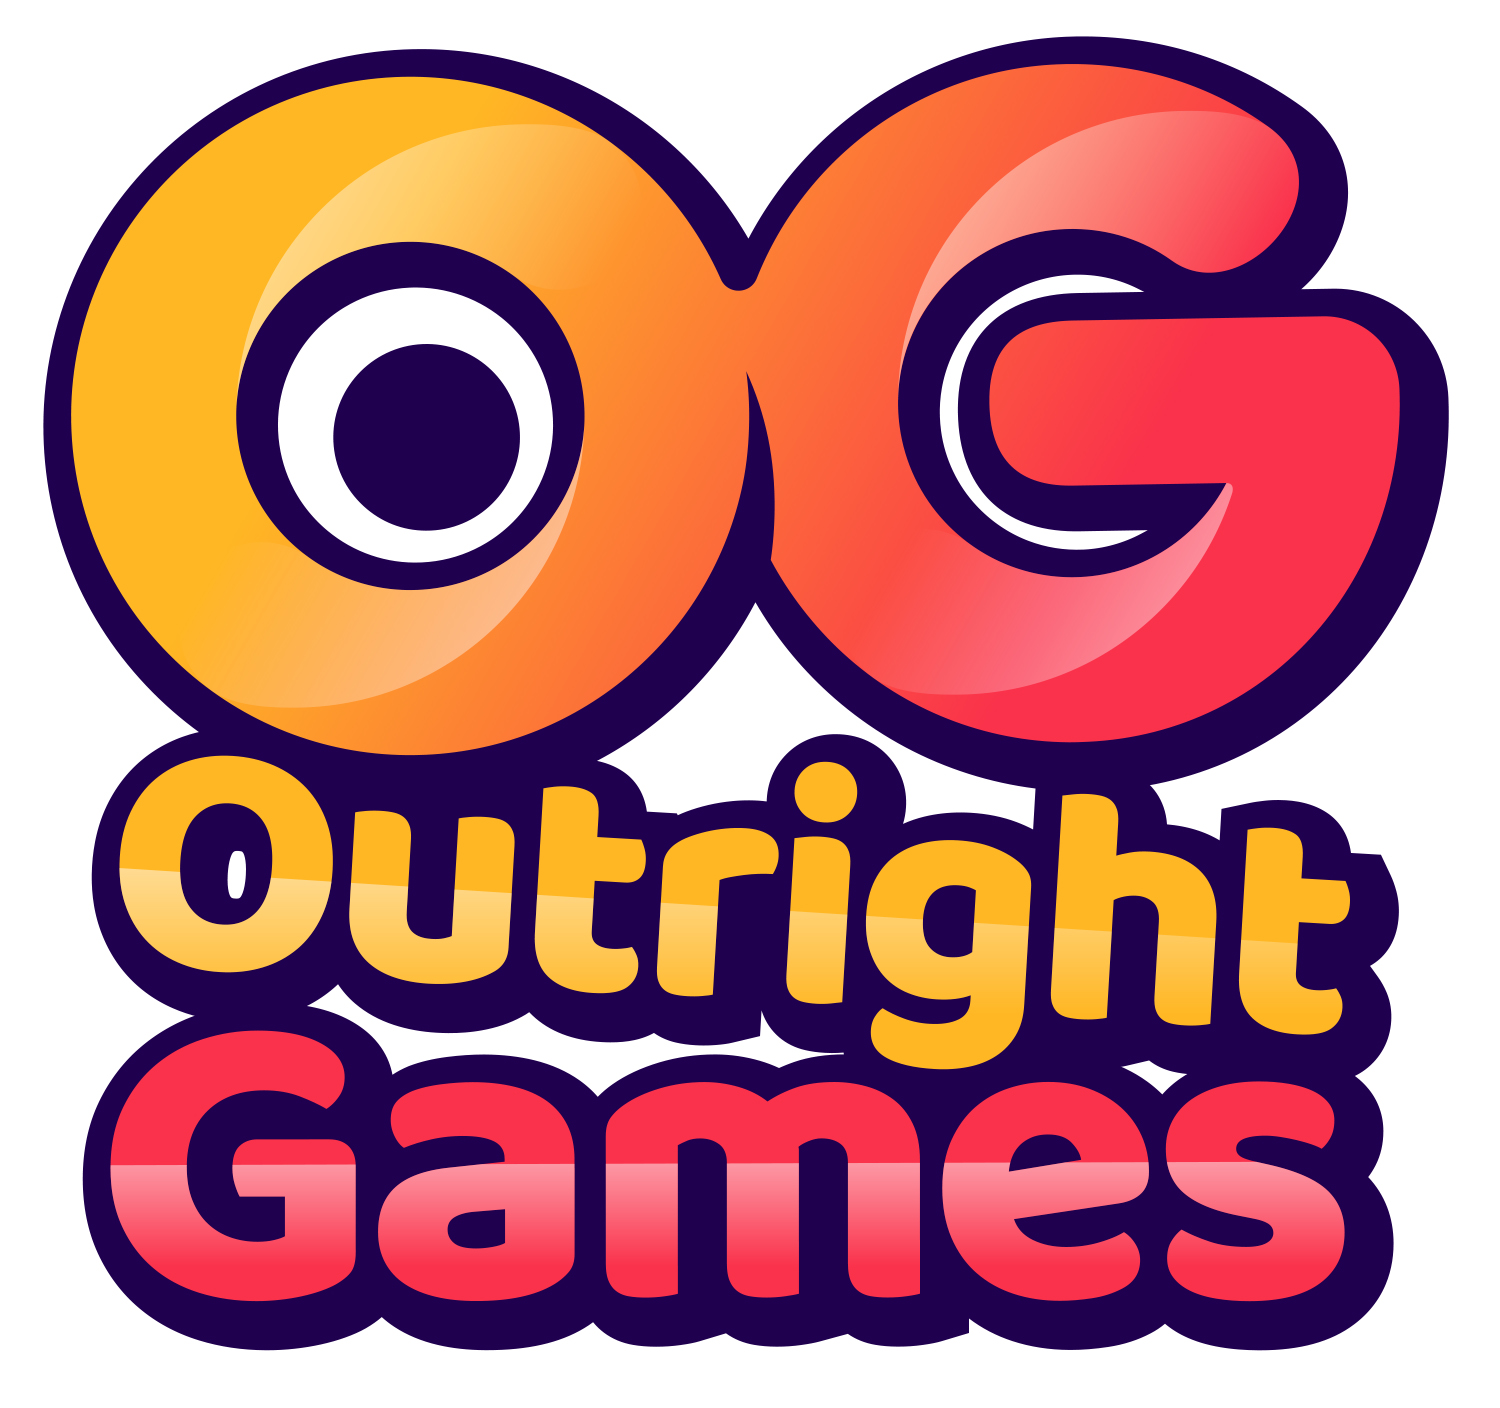 Fast & Furious - Videojuego infantil - Outright Games